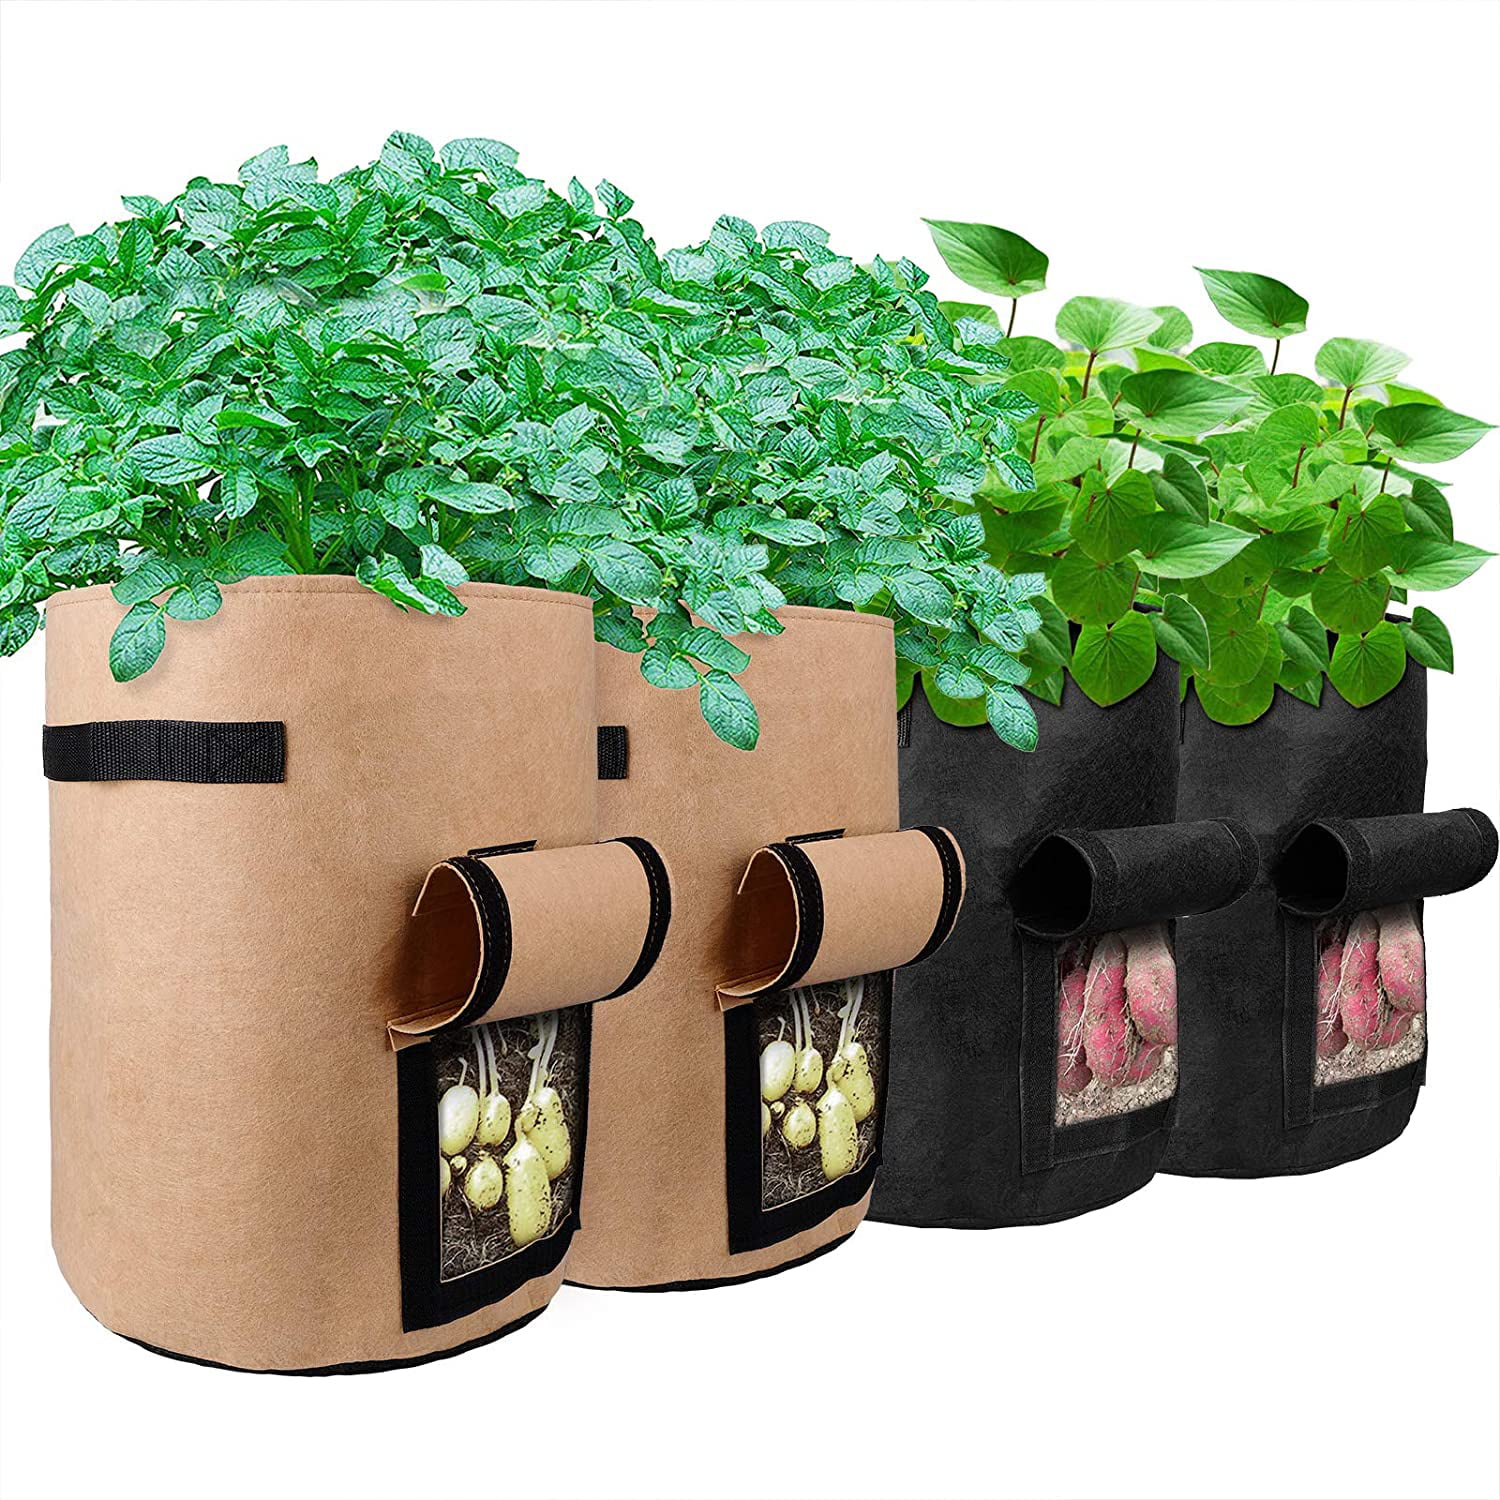 Pack Of 3 Breathable Garden Planter Growing Bags 3PK Black 10 Gallon Bags Green and Black Colour Vegetable Grow Bags with Access Flap and Carrying Handles